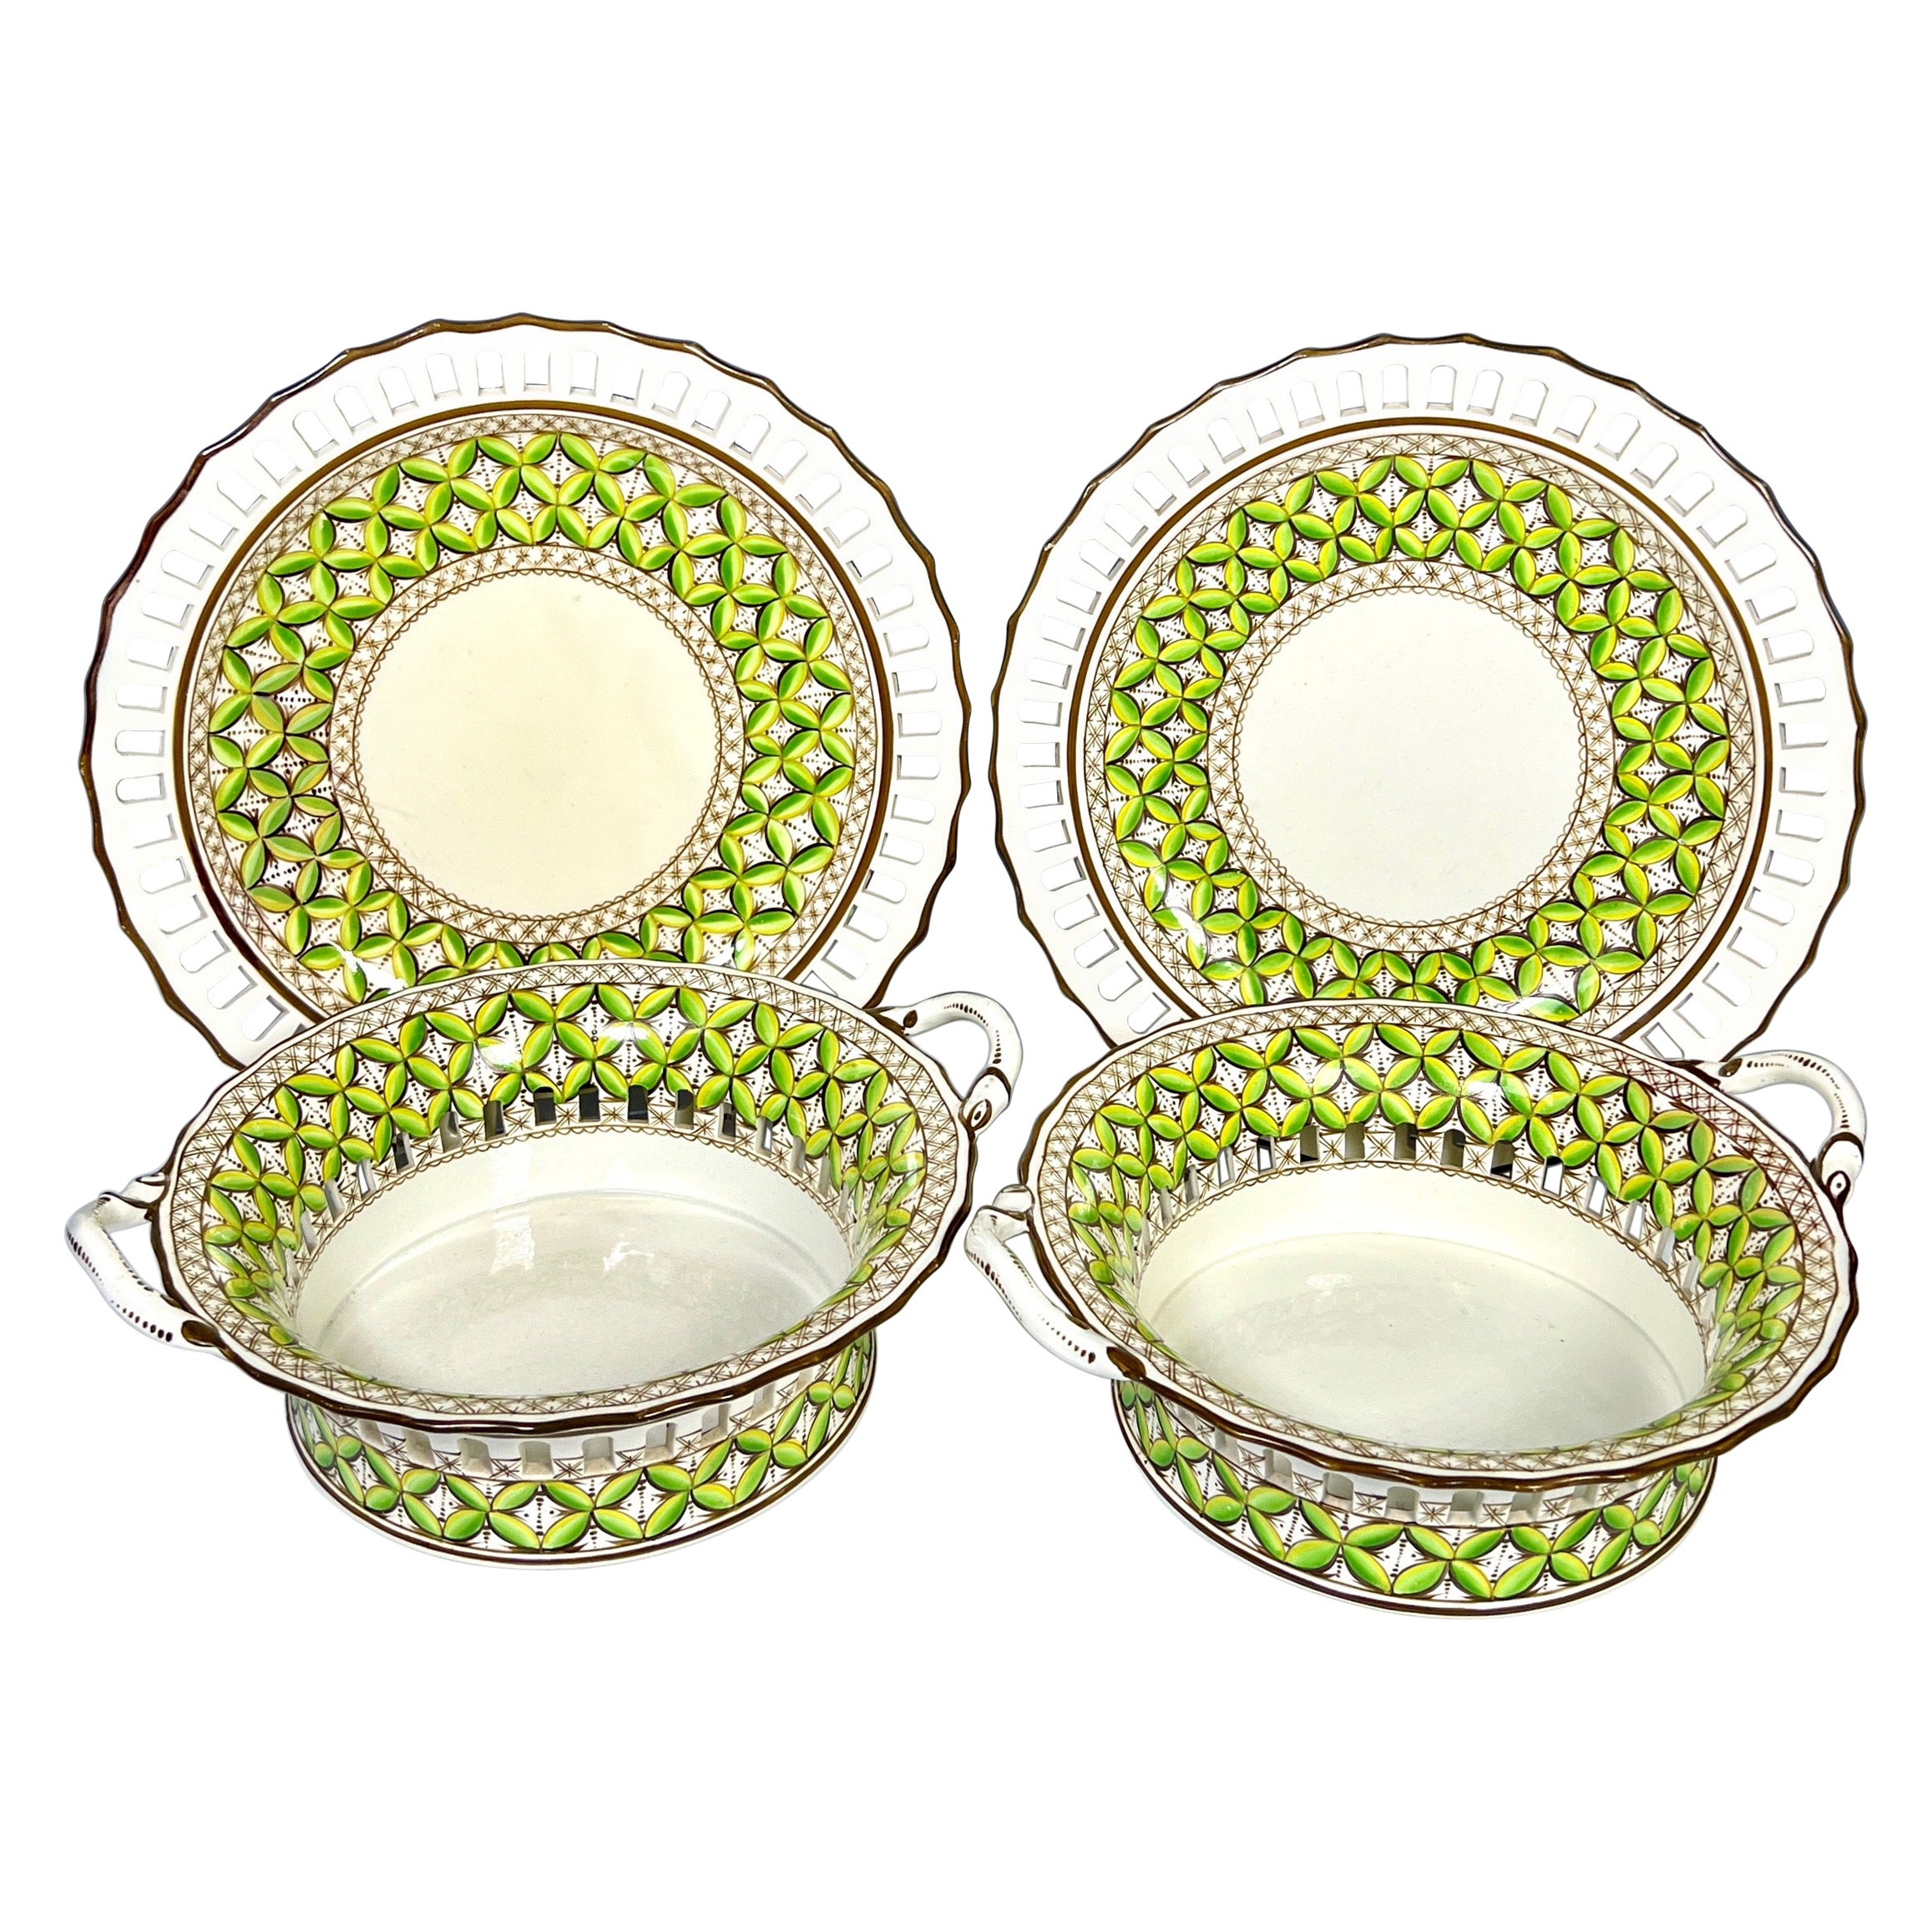 Pair of Spode 19th C Pierced Green Chestnut Baskets & Under Plates For Sale